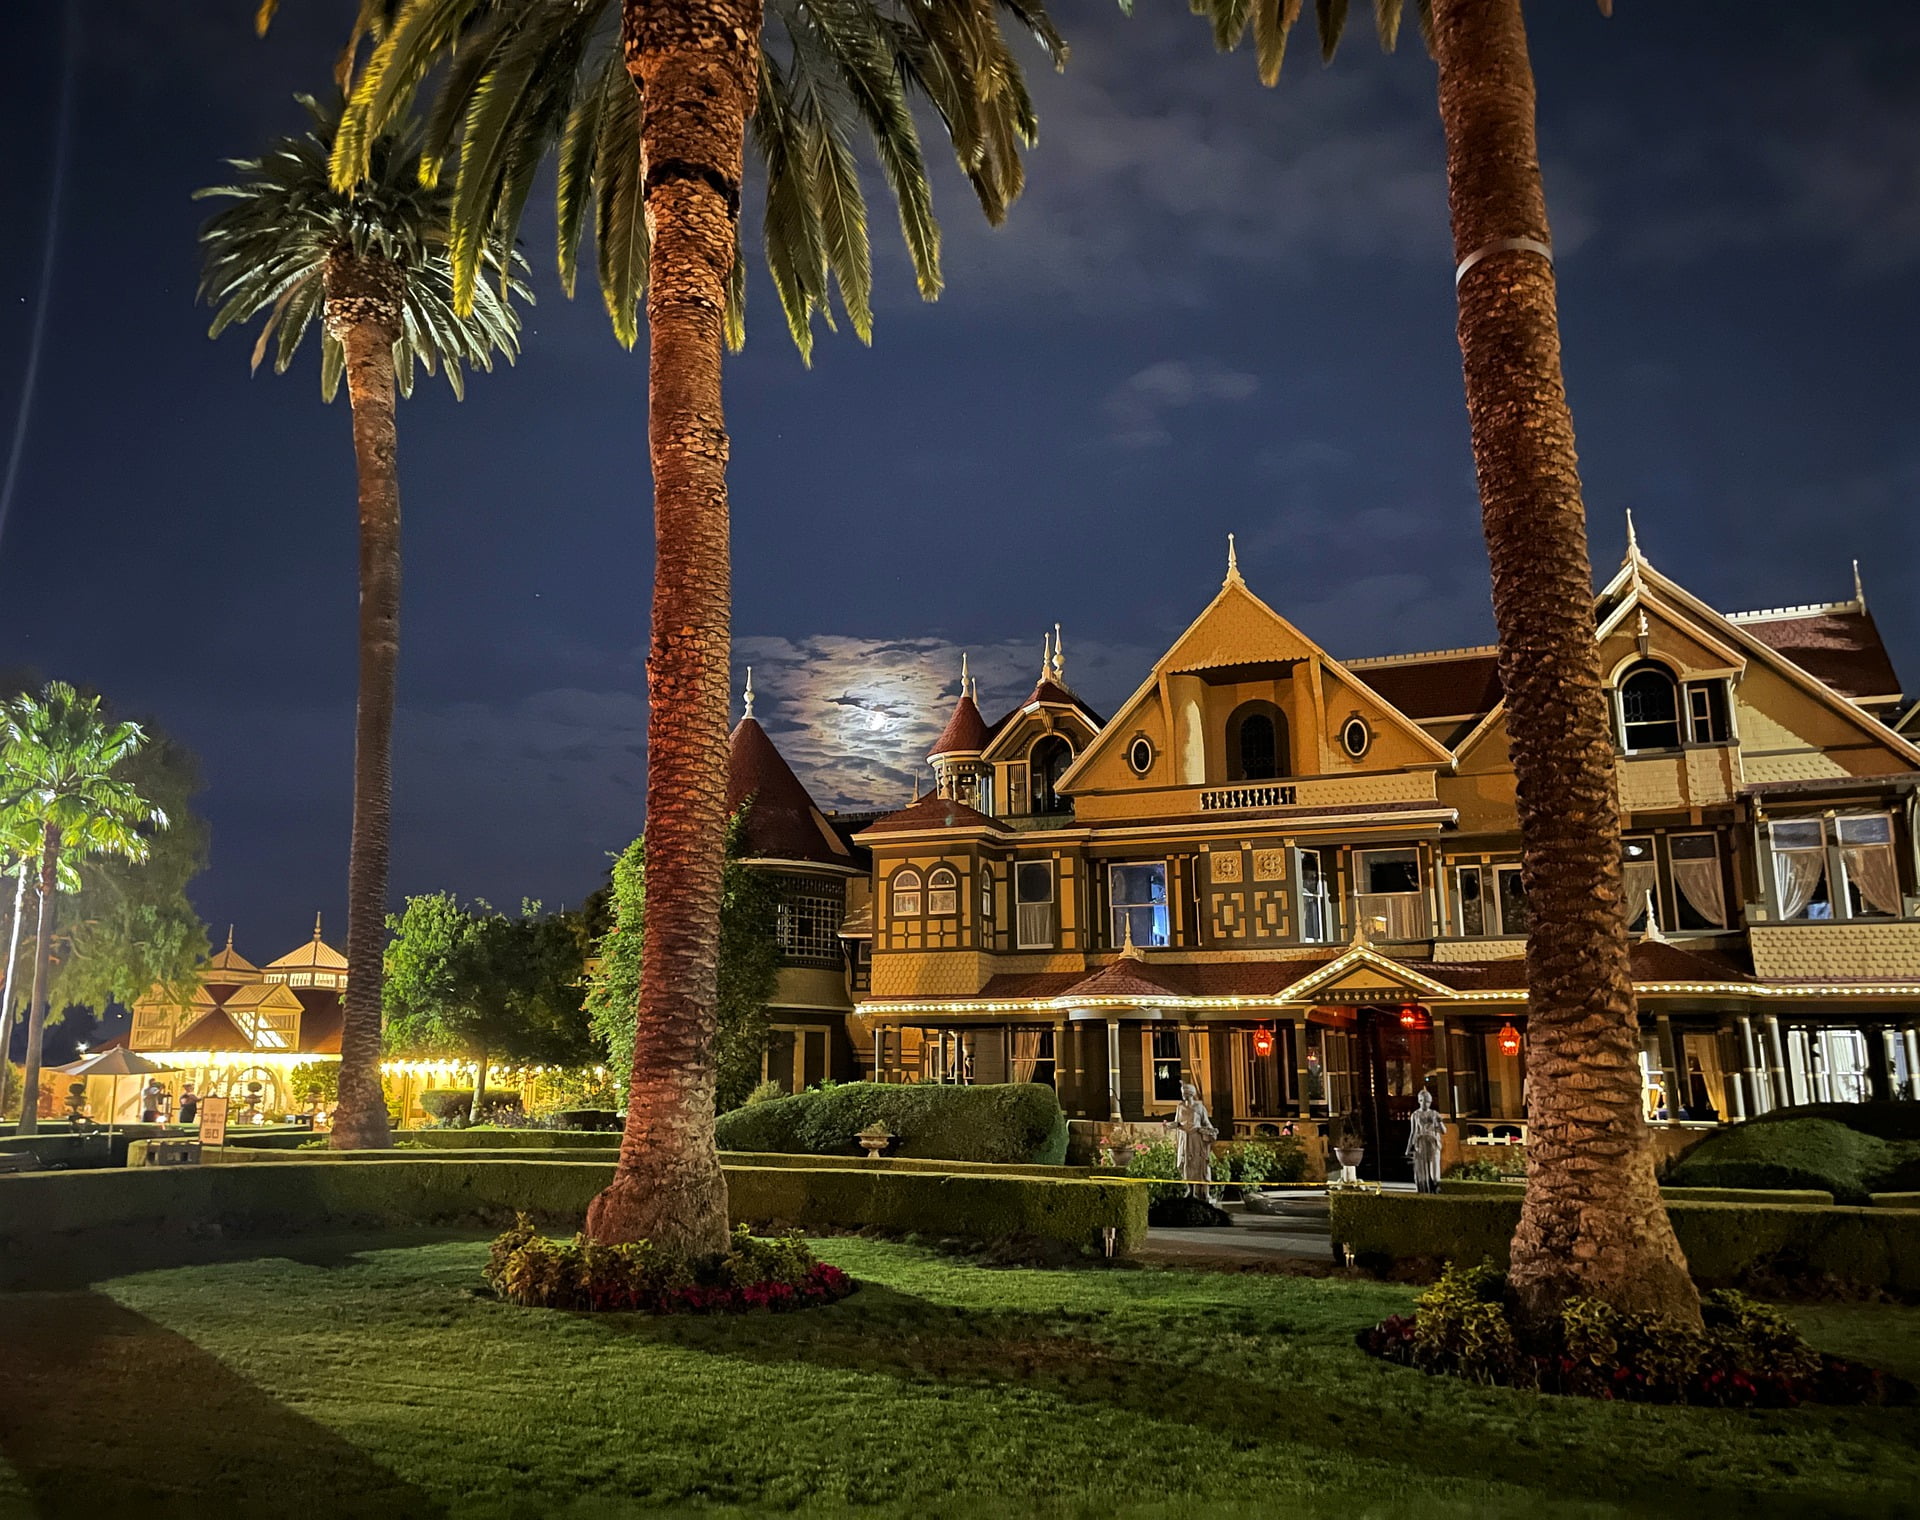 Why Is The Winchester House A Mystery?